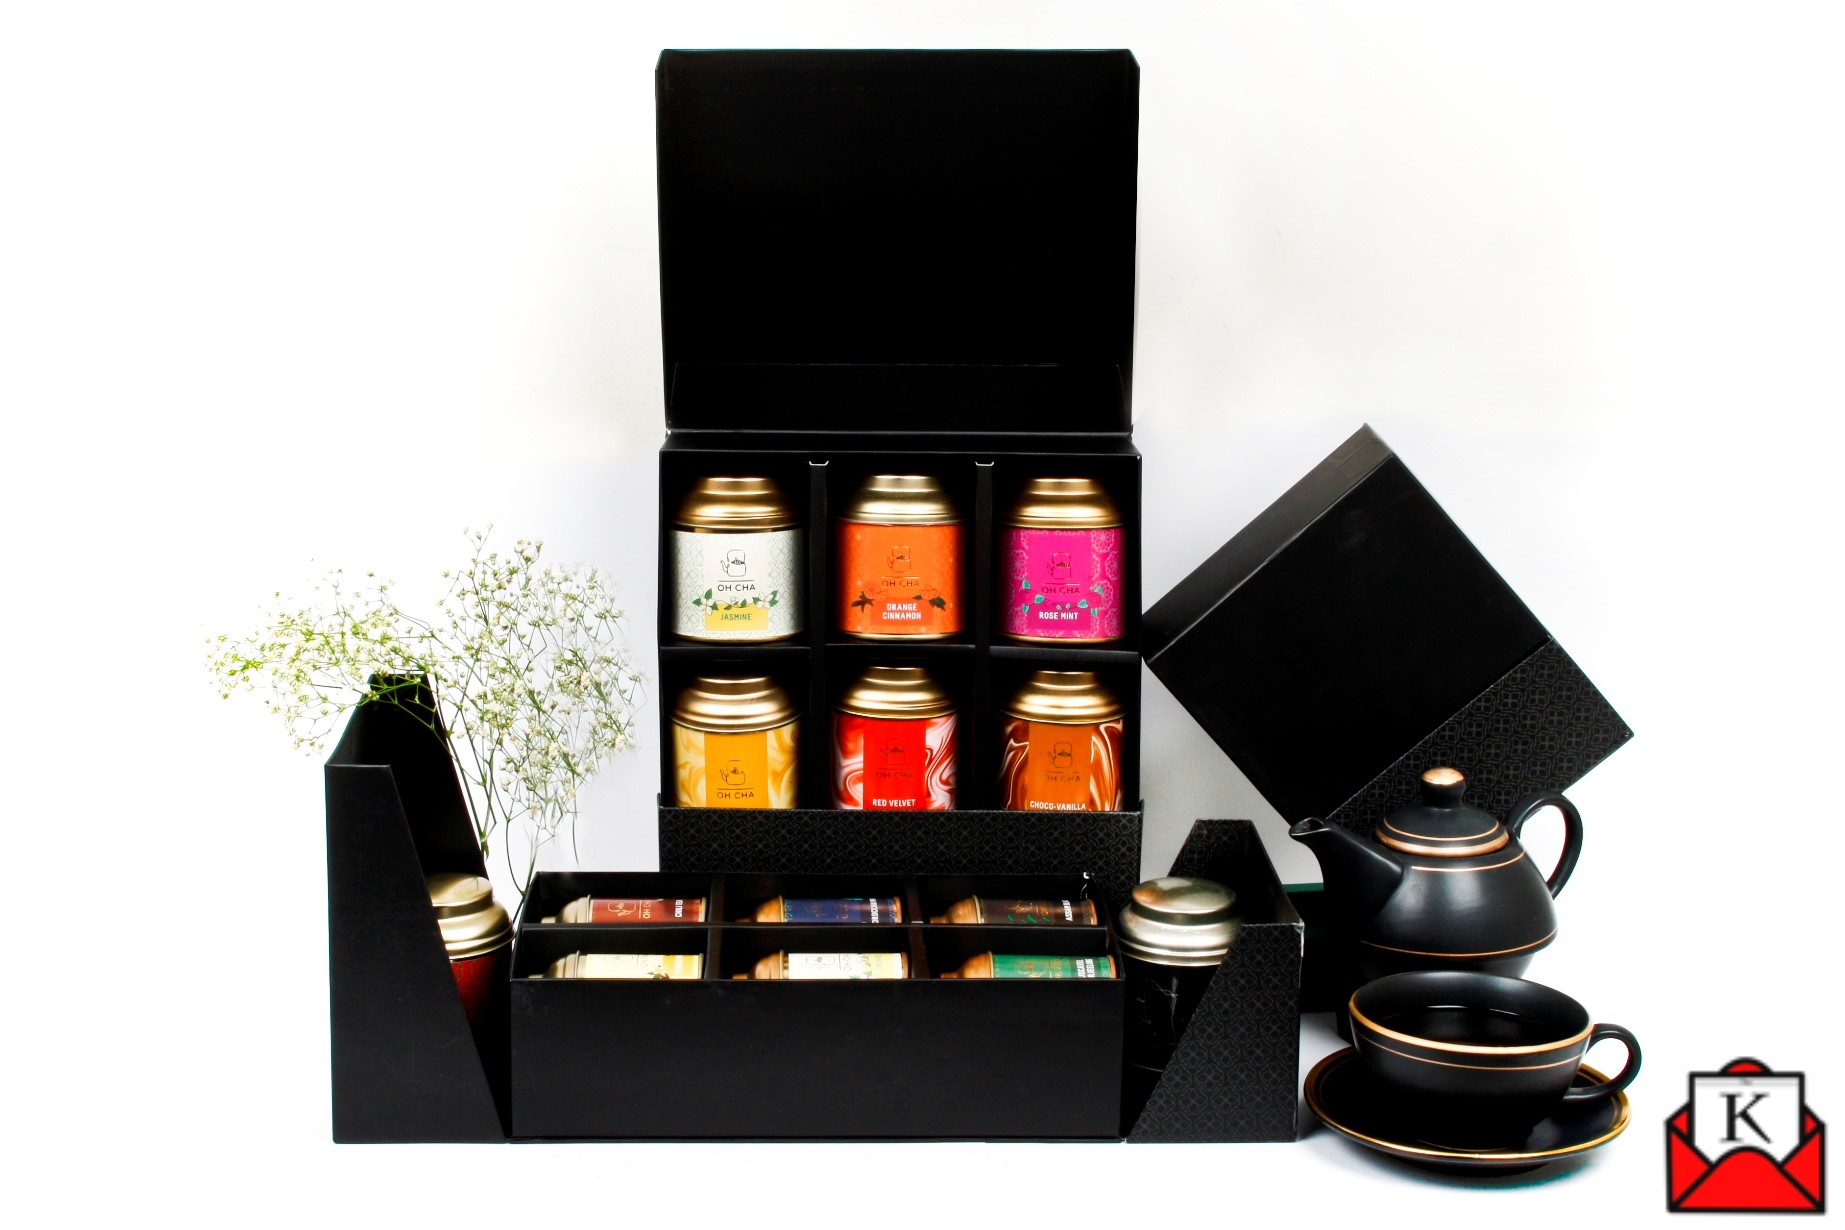 Consume Flavored Teas at Oh Cha to Celebrate and Rejuvenate Yourself During the Pujas